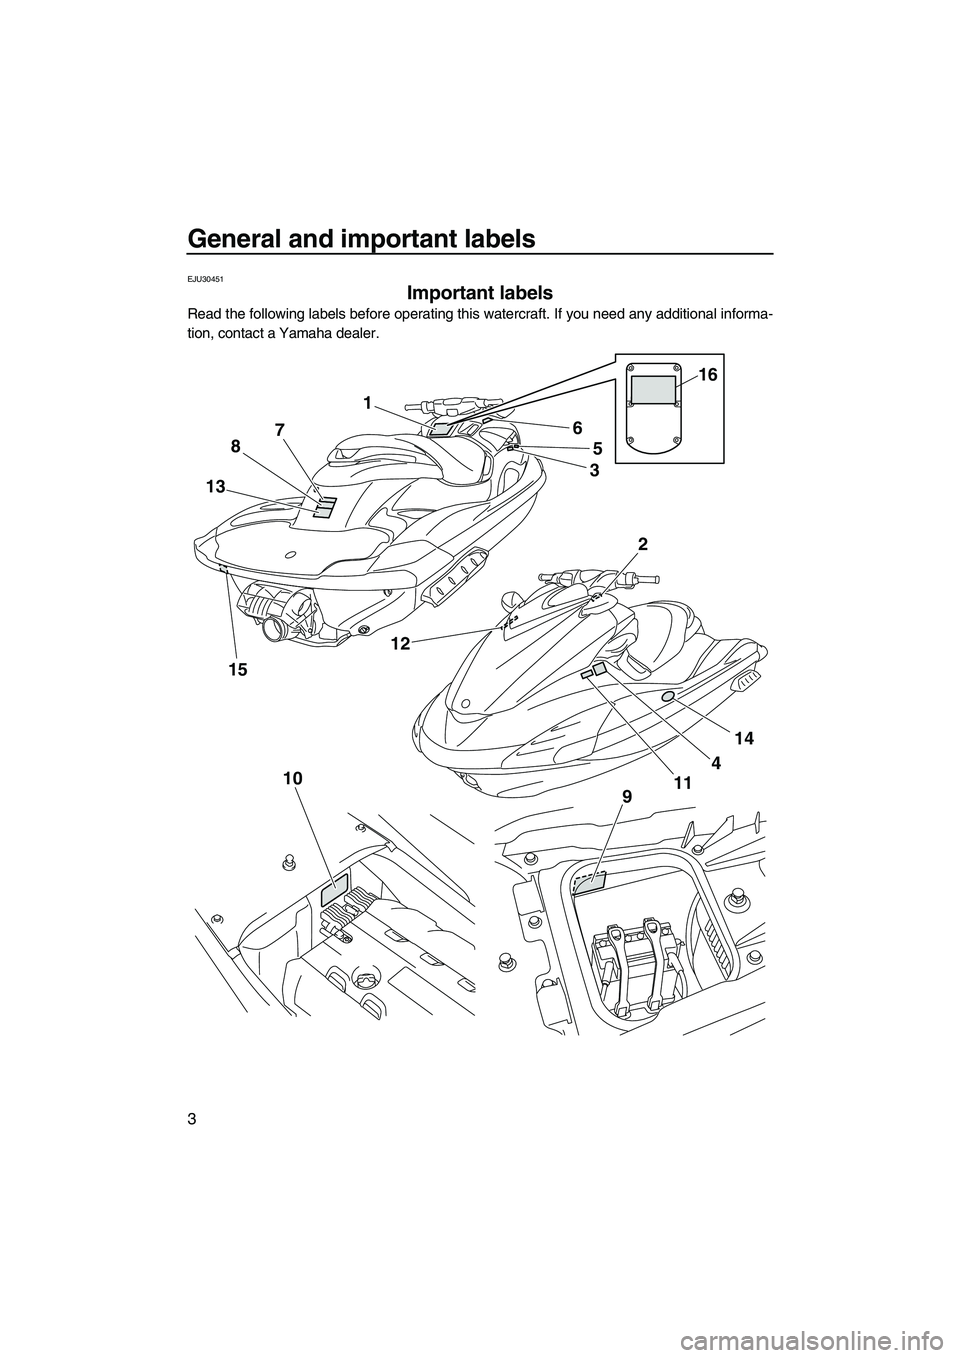 YAMAHA FZR 2009  Owners Manual General and important labels
3
EJU30451
Important labels 
Read the following labels before operating this watercraft. If you need any additional informa-
tion, contact a Yamaha dealer.
1
5
3
4
11 6
87